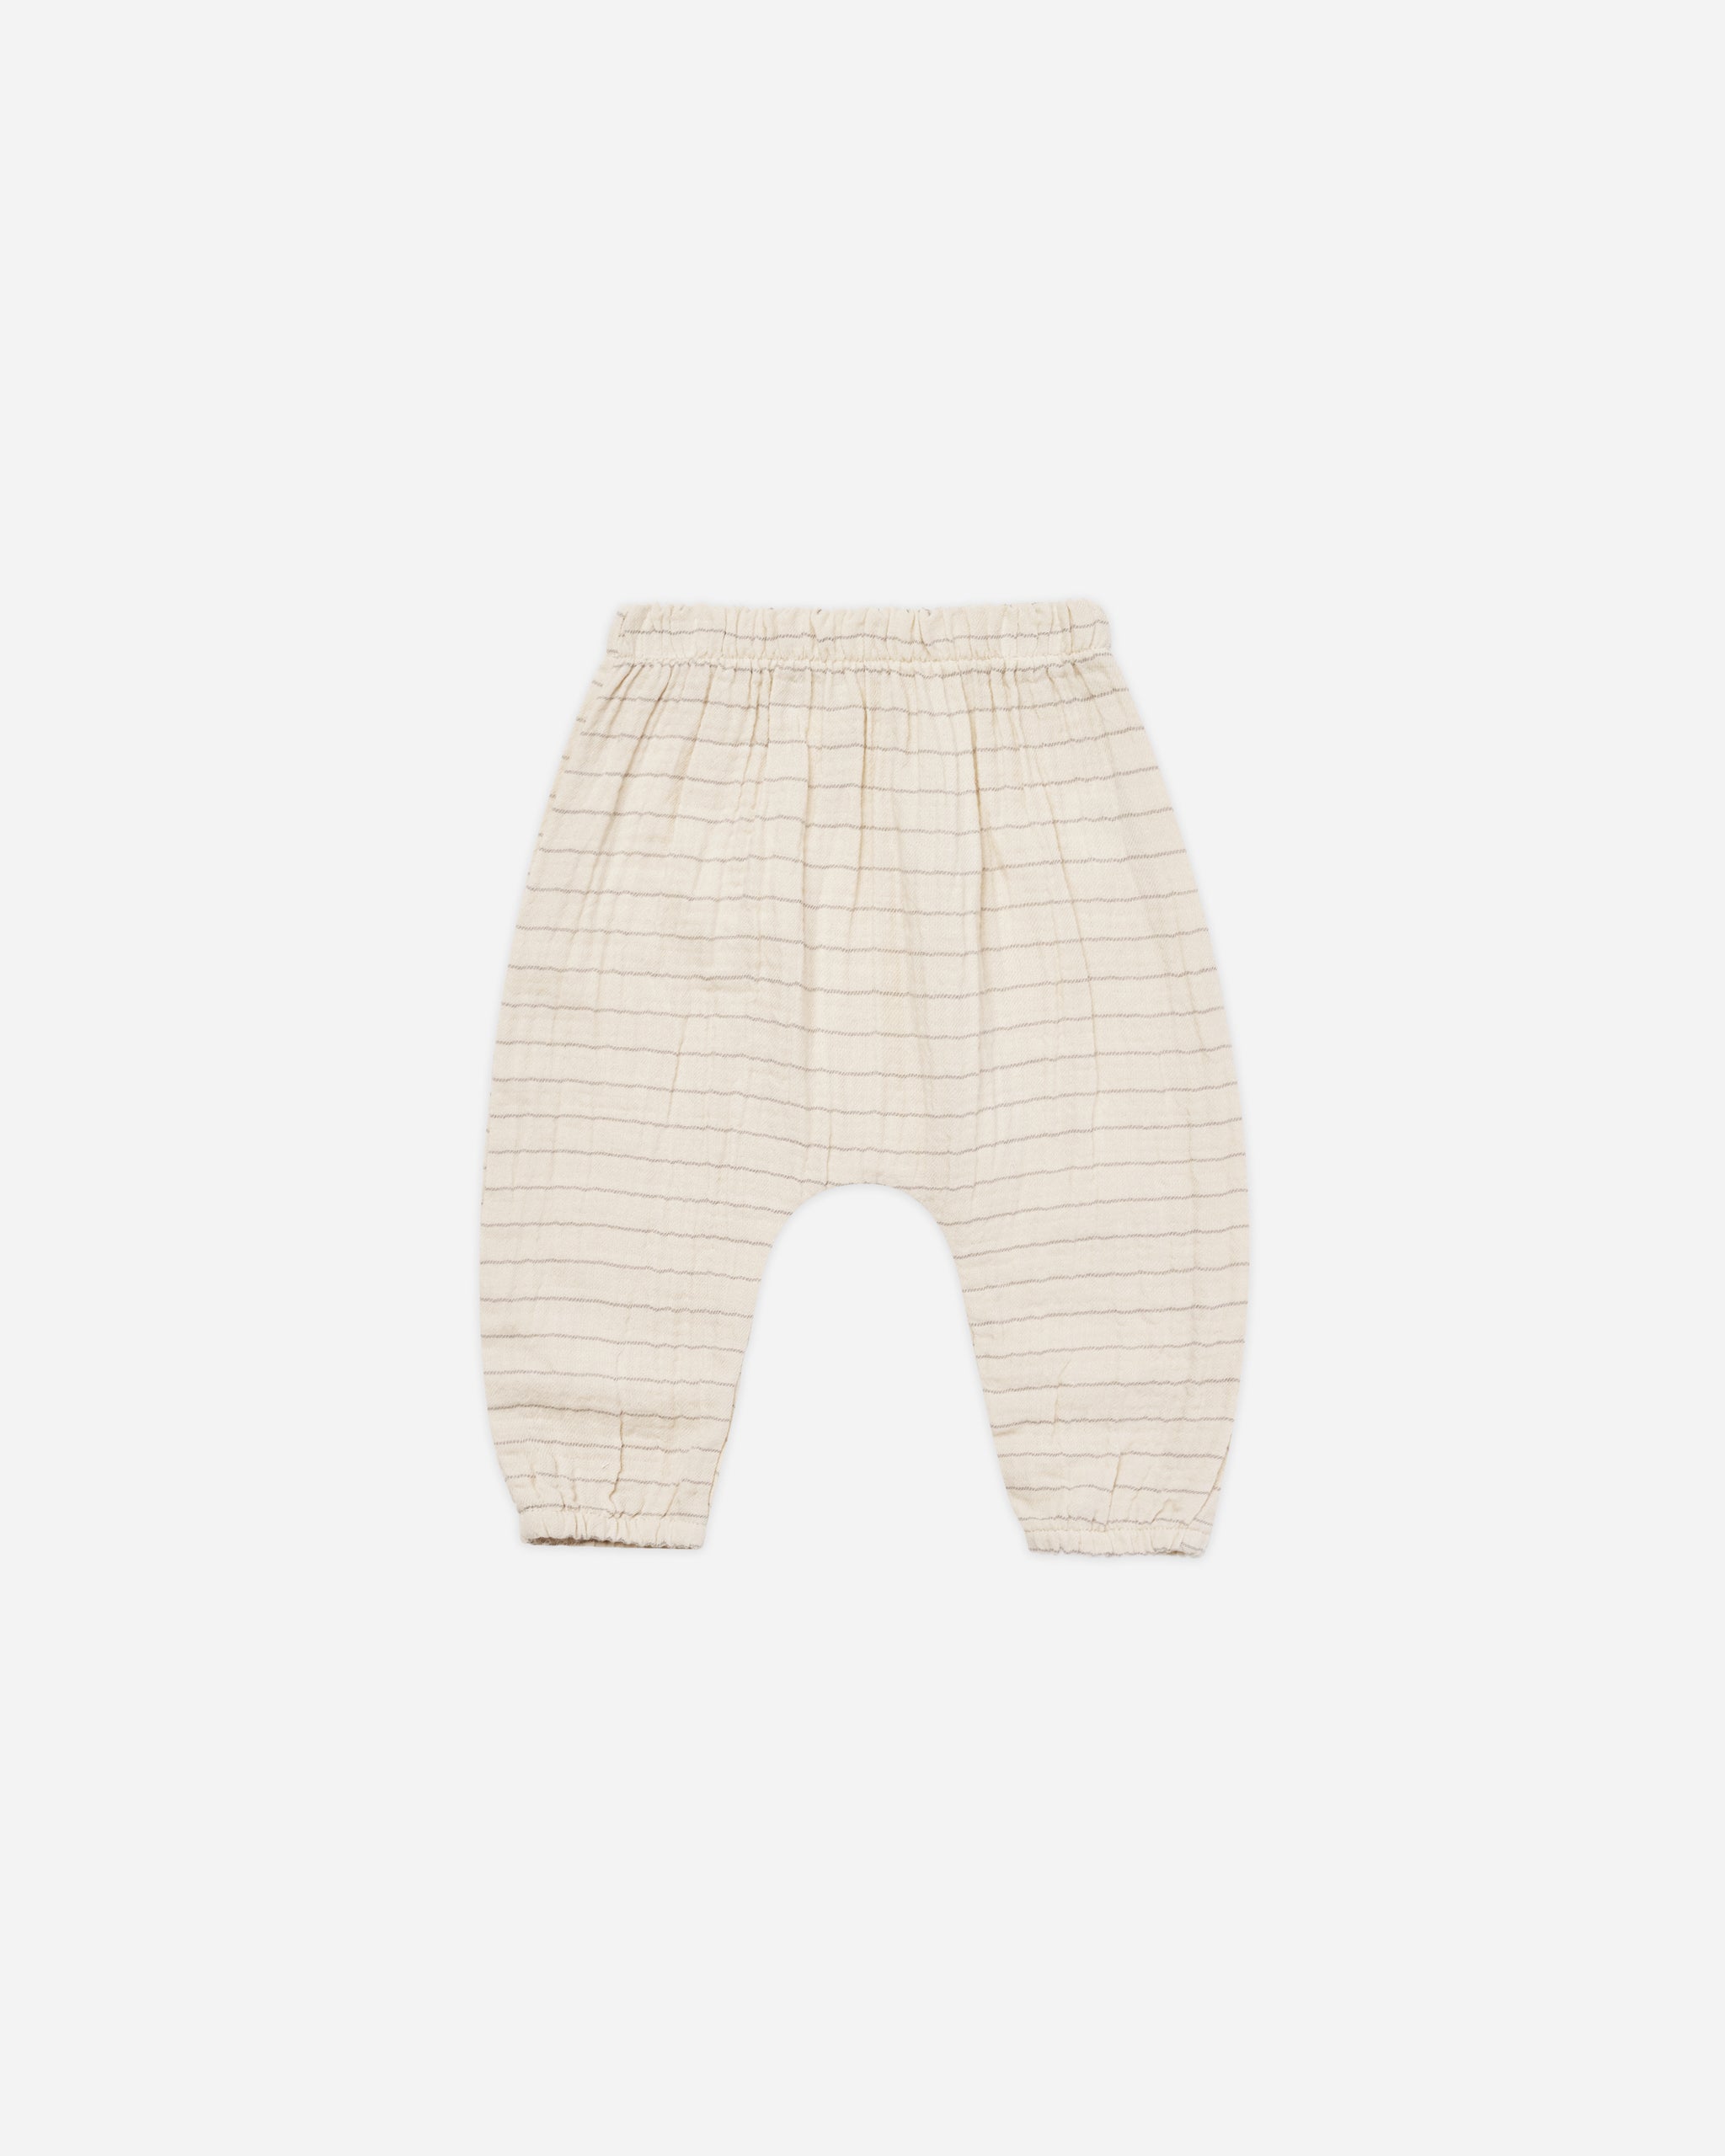 Woven Pant || Vintage Stripe - Rylee + Cru | Kids Clothes | Trendy Baby Clothes | Modern Infant Outfits |